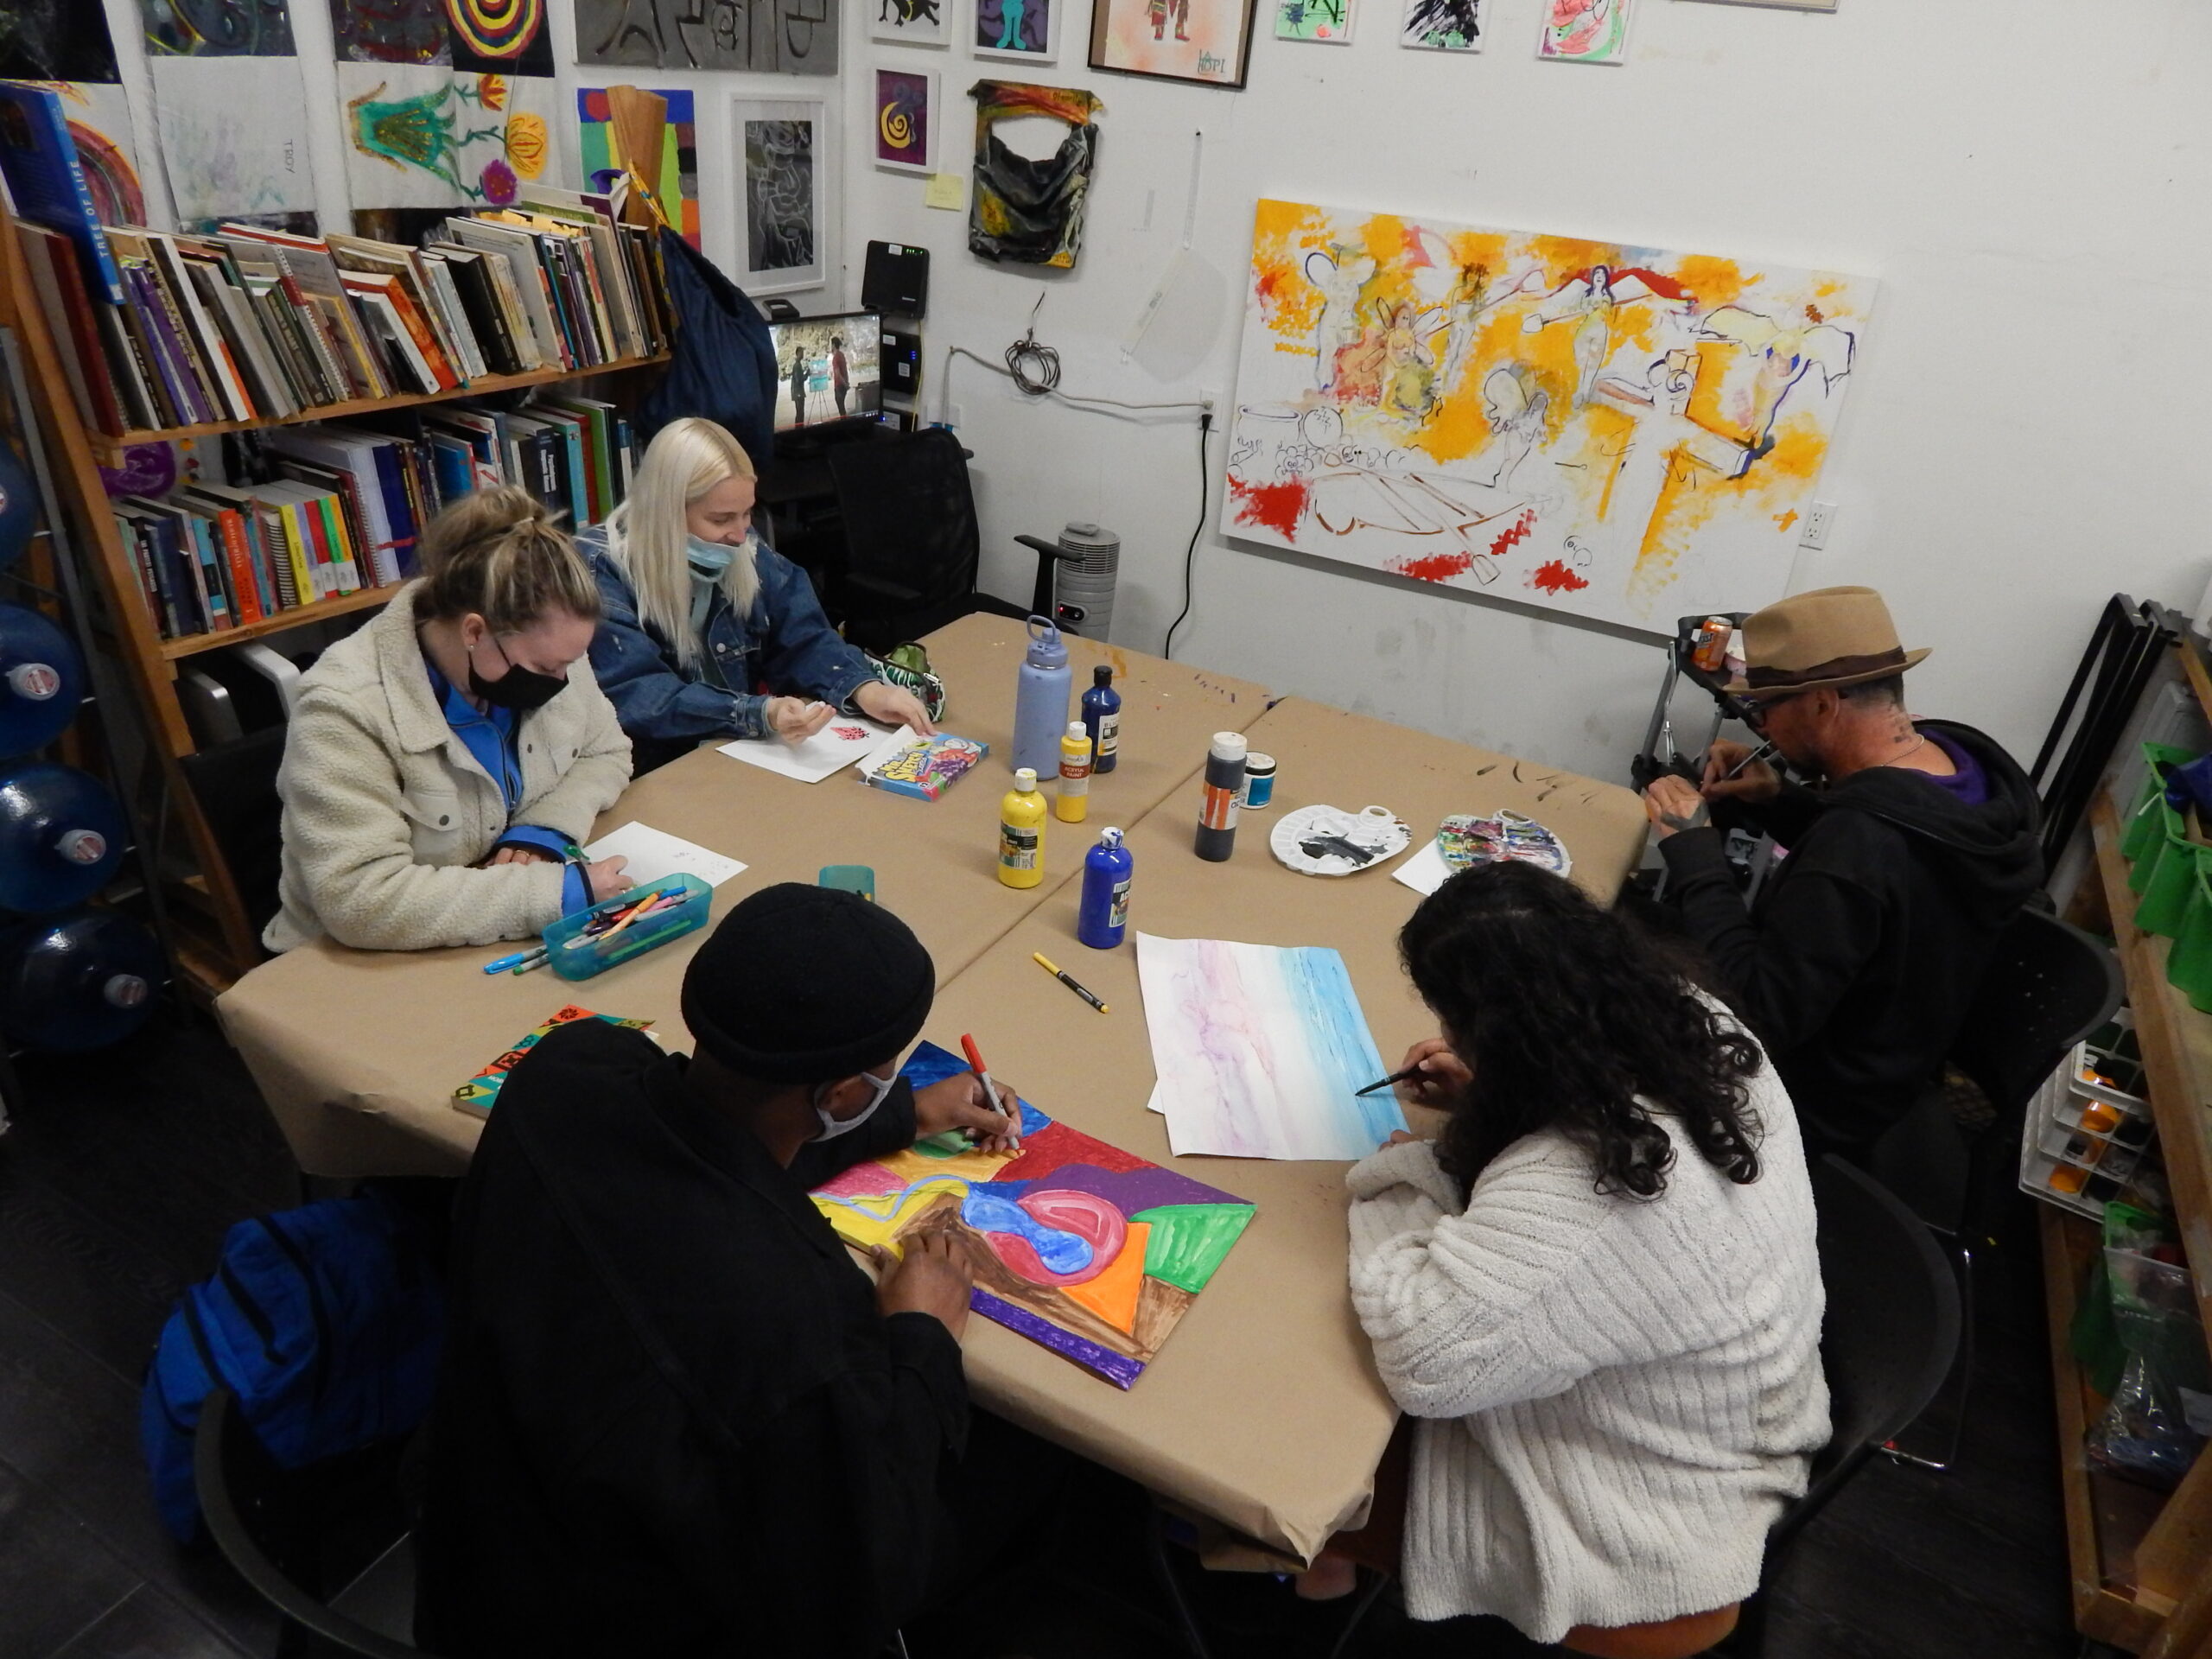 A crowded community center back room art group space 3